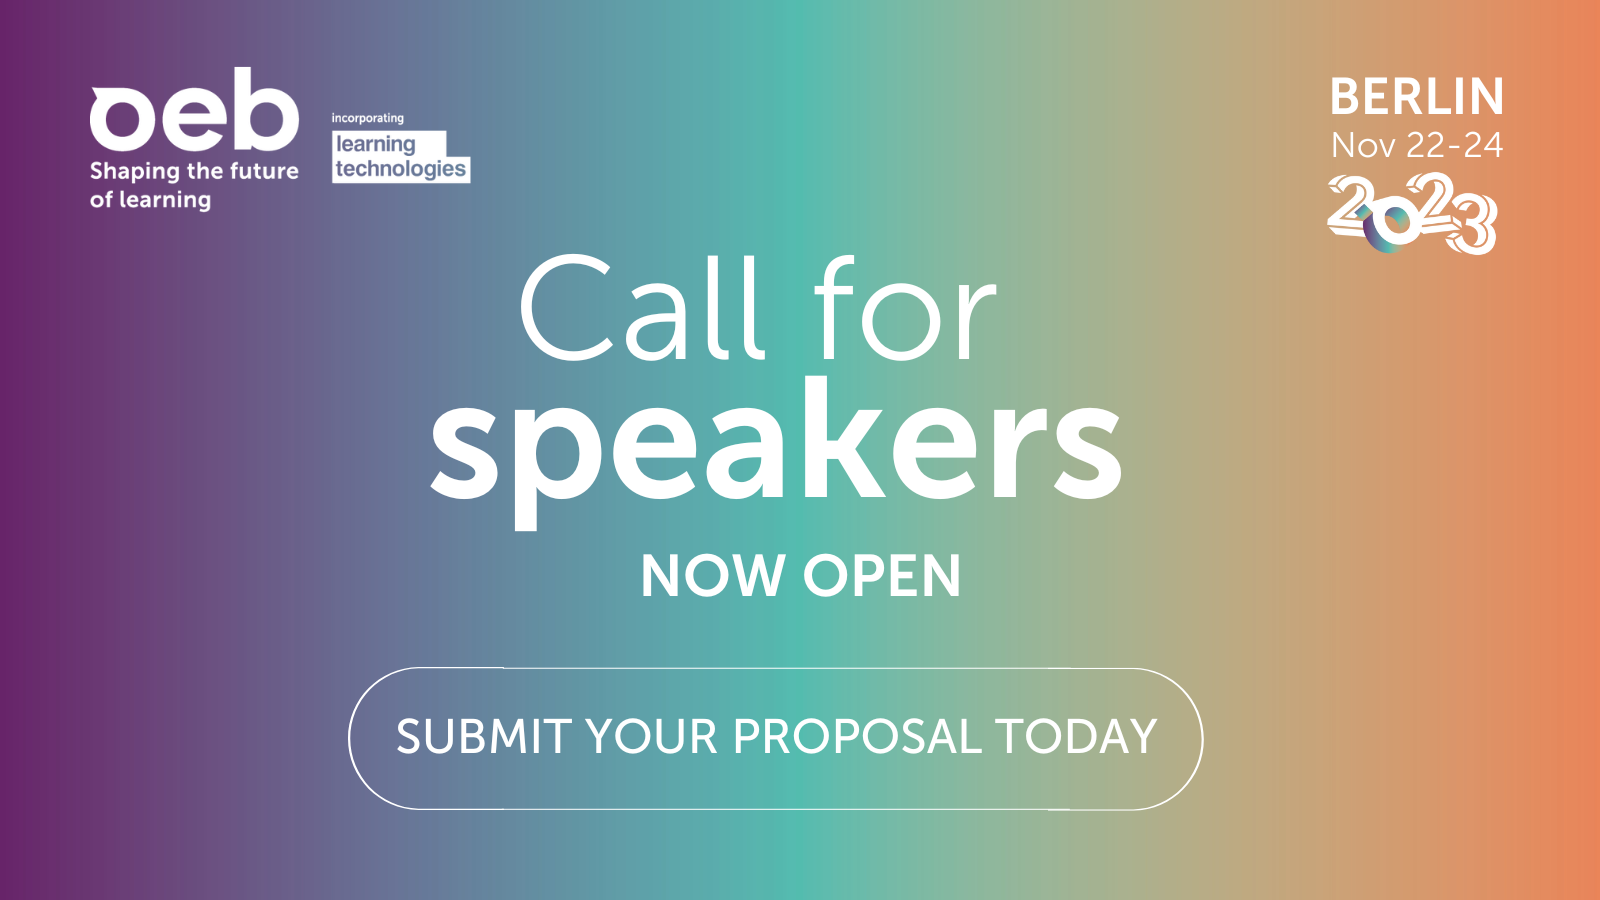 OEB 2023 - The Learning Futures We Choose. The call for proposals for the conference has opened.